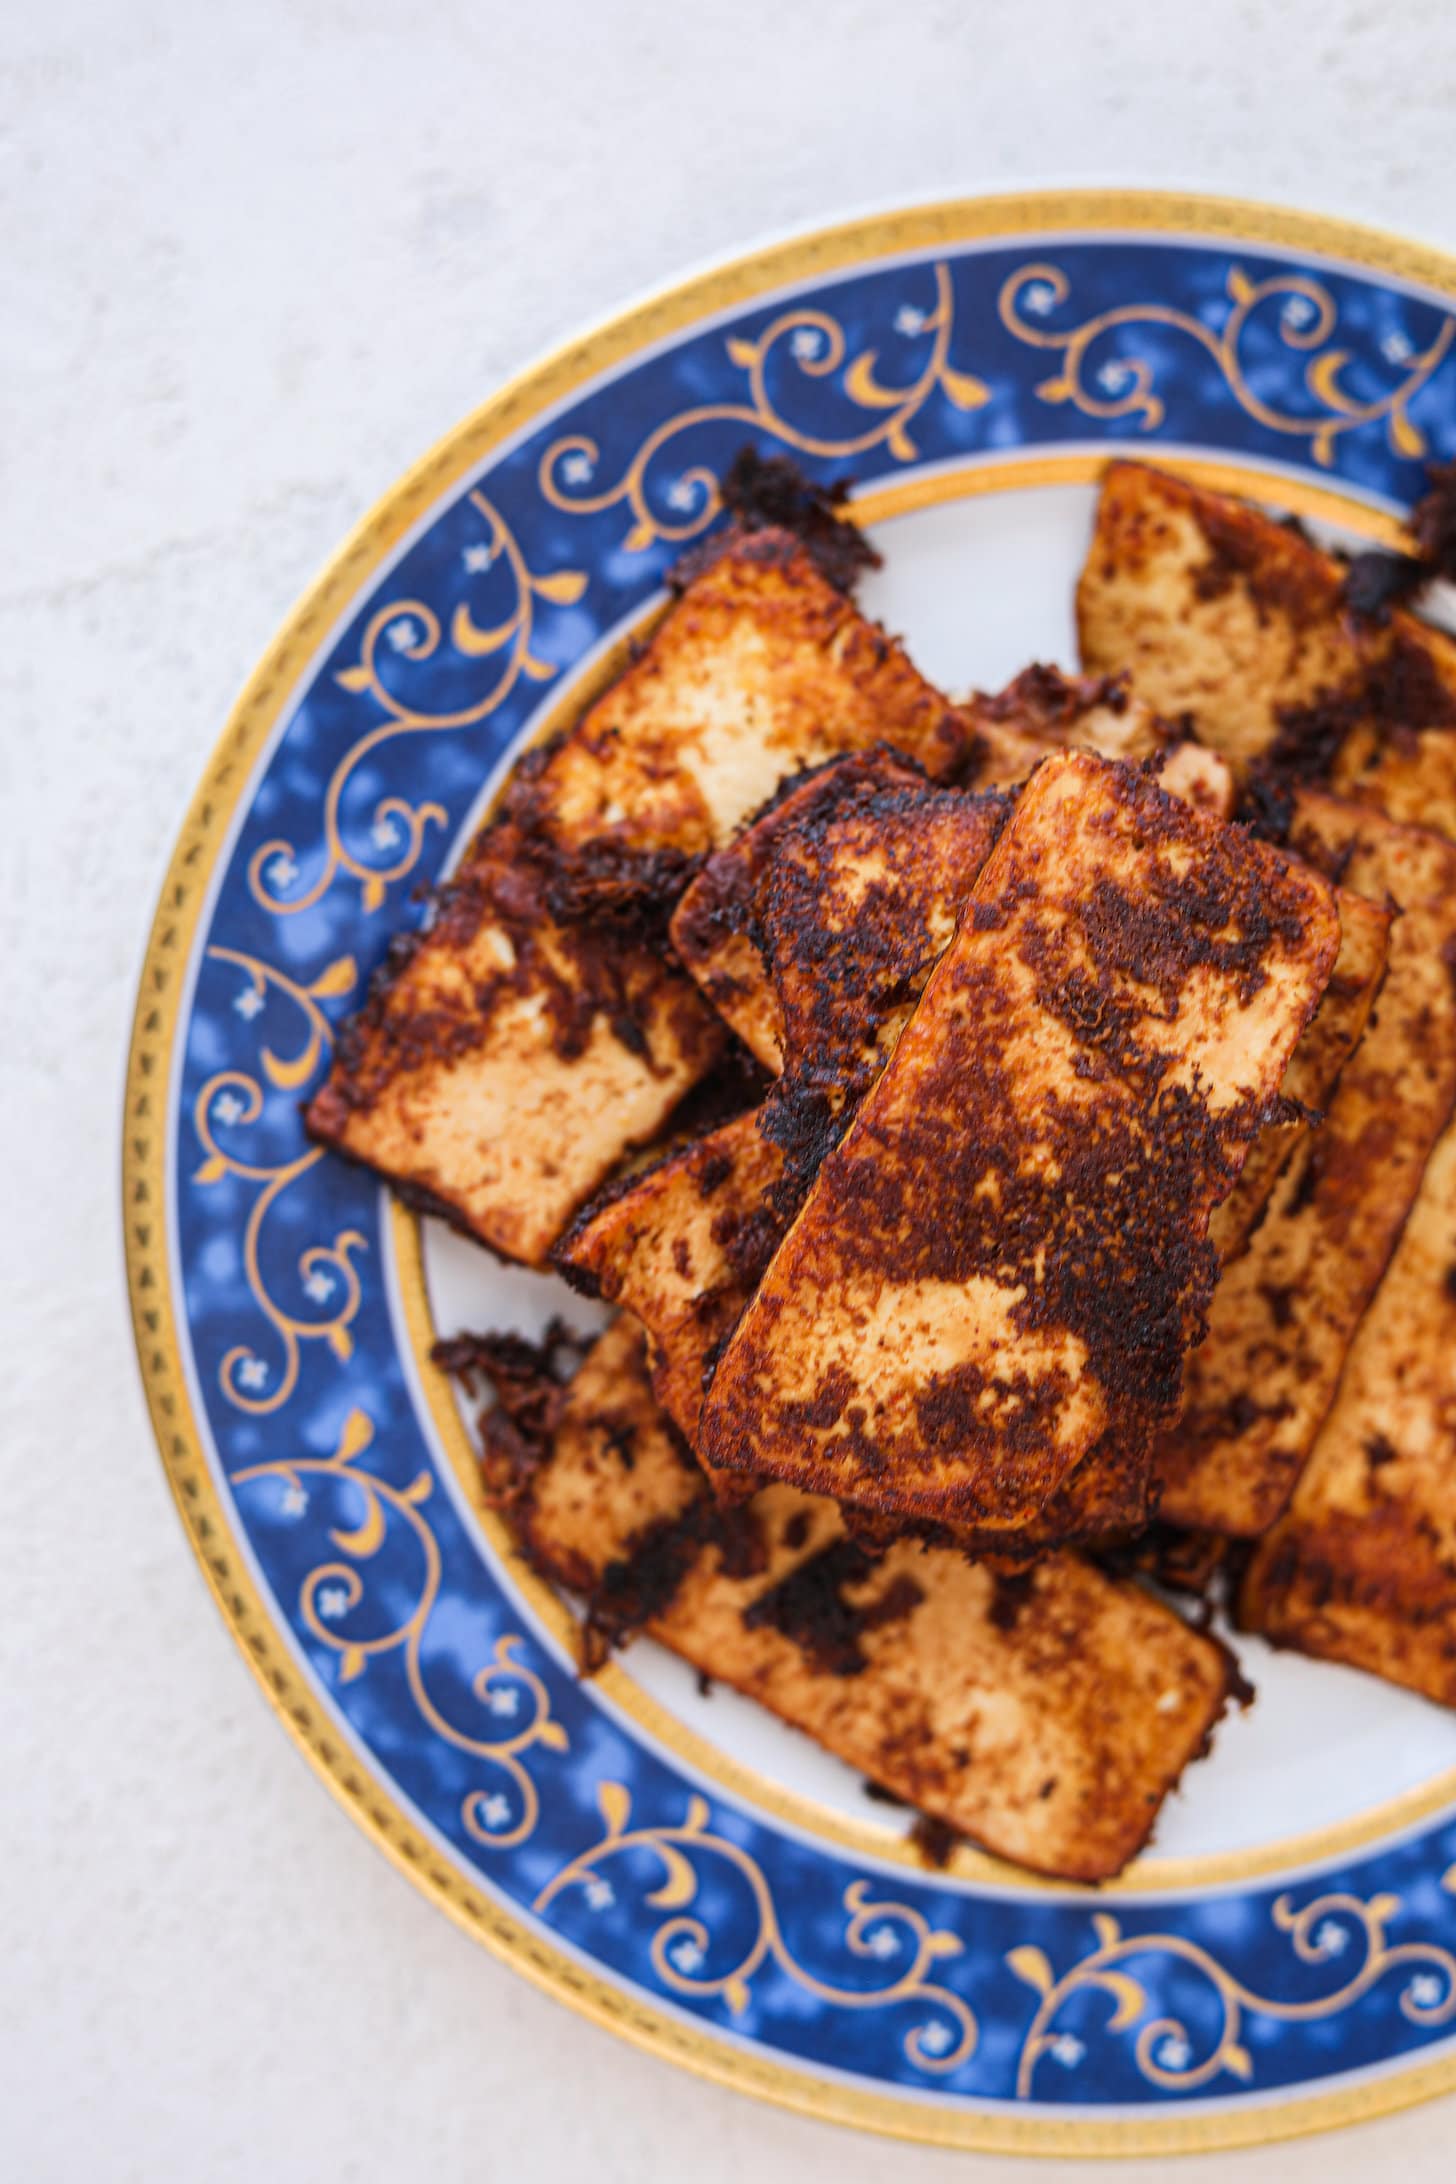 Overhead shot of a pile of crispy tofu slabs on a plate with a decorative blue boarder.